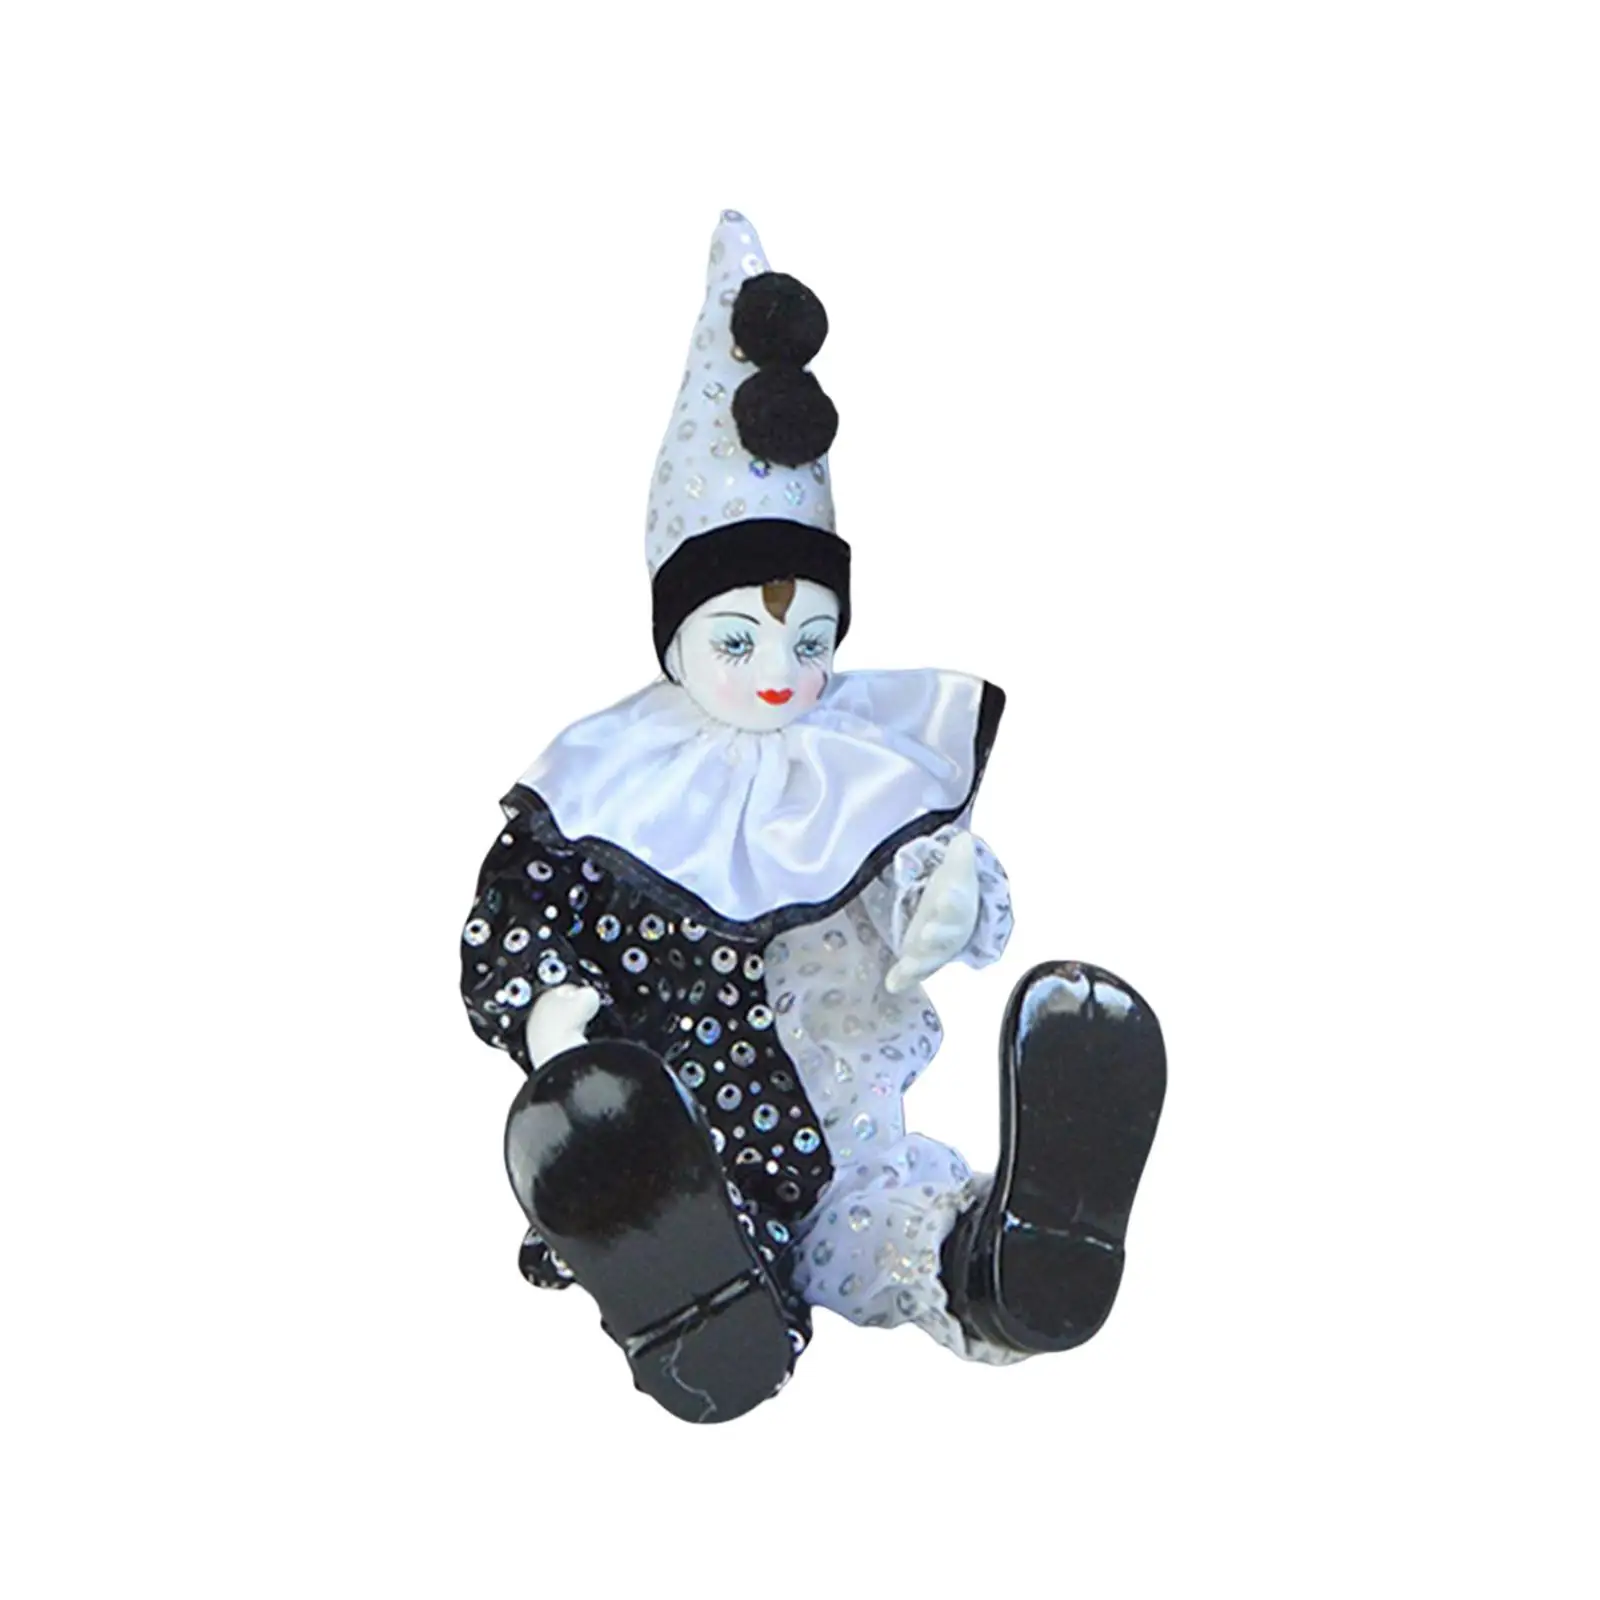 

Funny Porcelain Clown Model Standing Collectible Doll Ornaments 15inch Clown Dolls for Festival Party Halloween Arts Crafts Gift